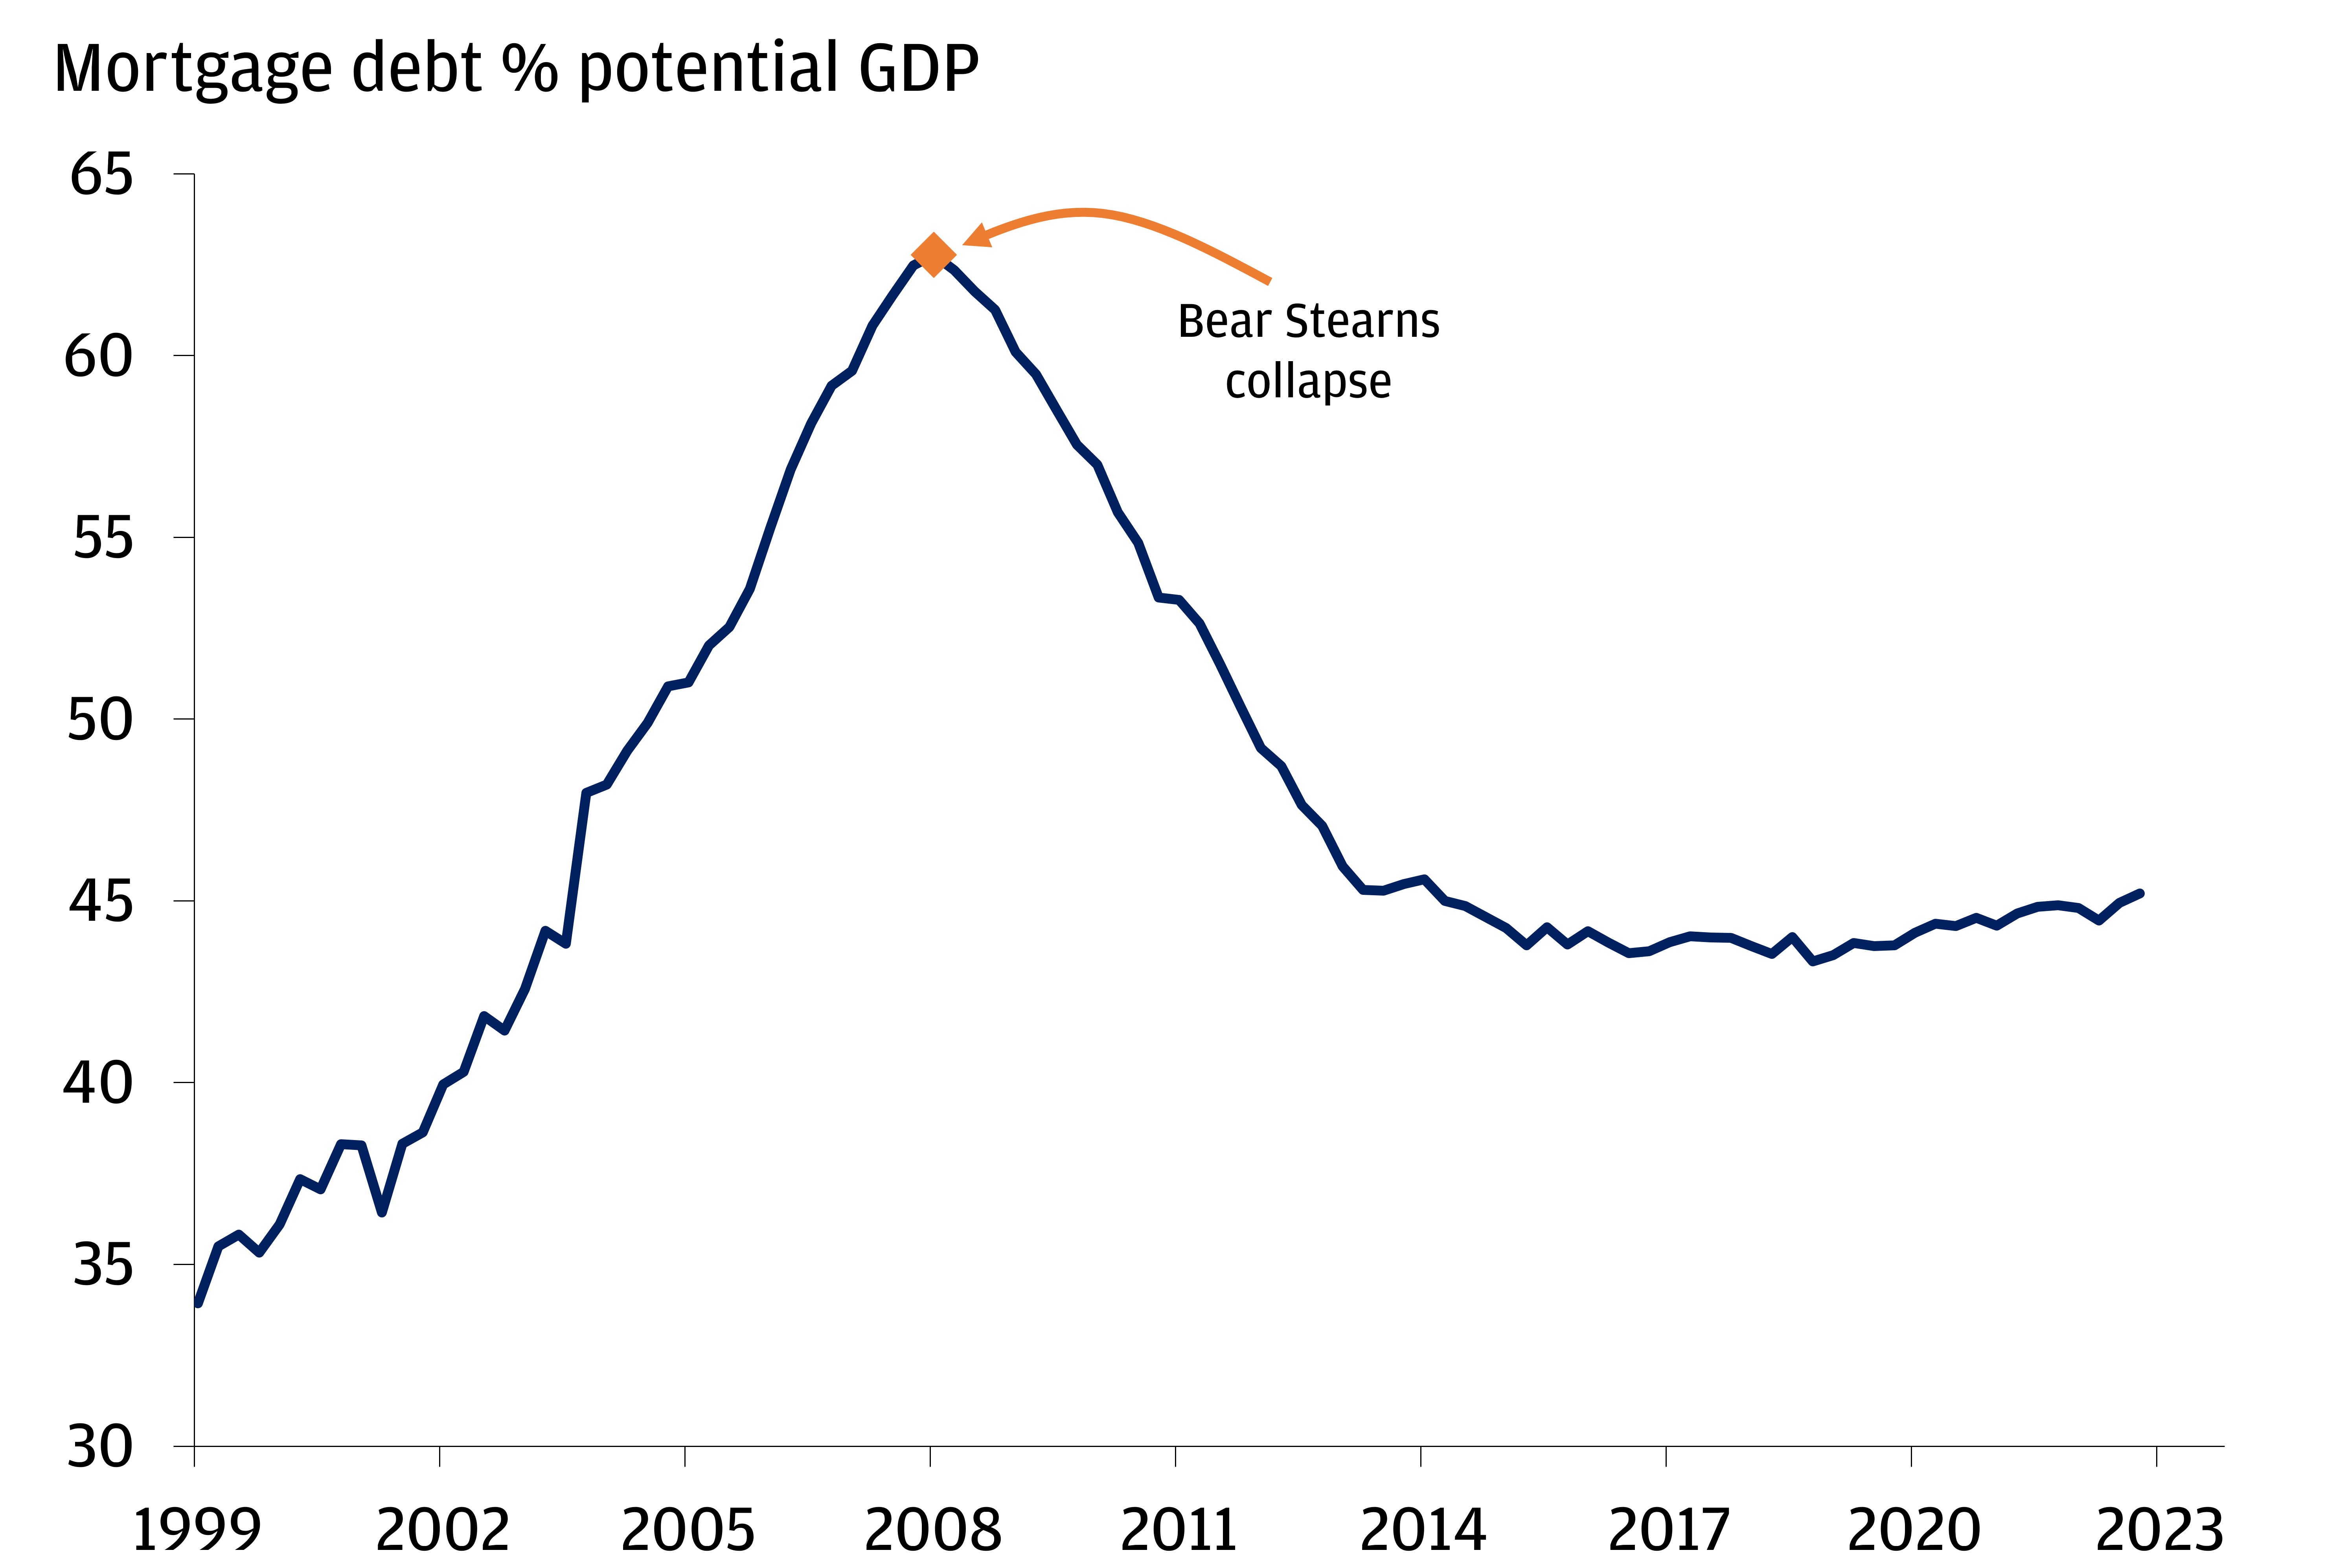 The charts shows mortgage debt as a % of potential GDP from March 1999 to December 2022.